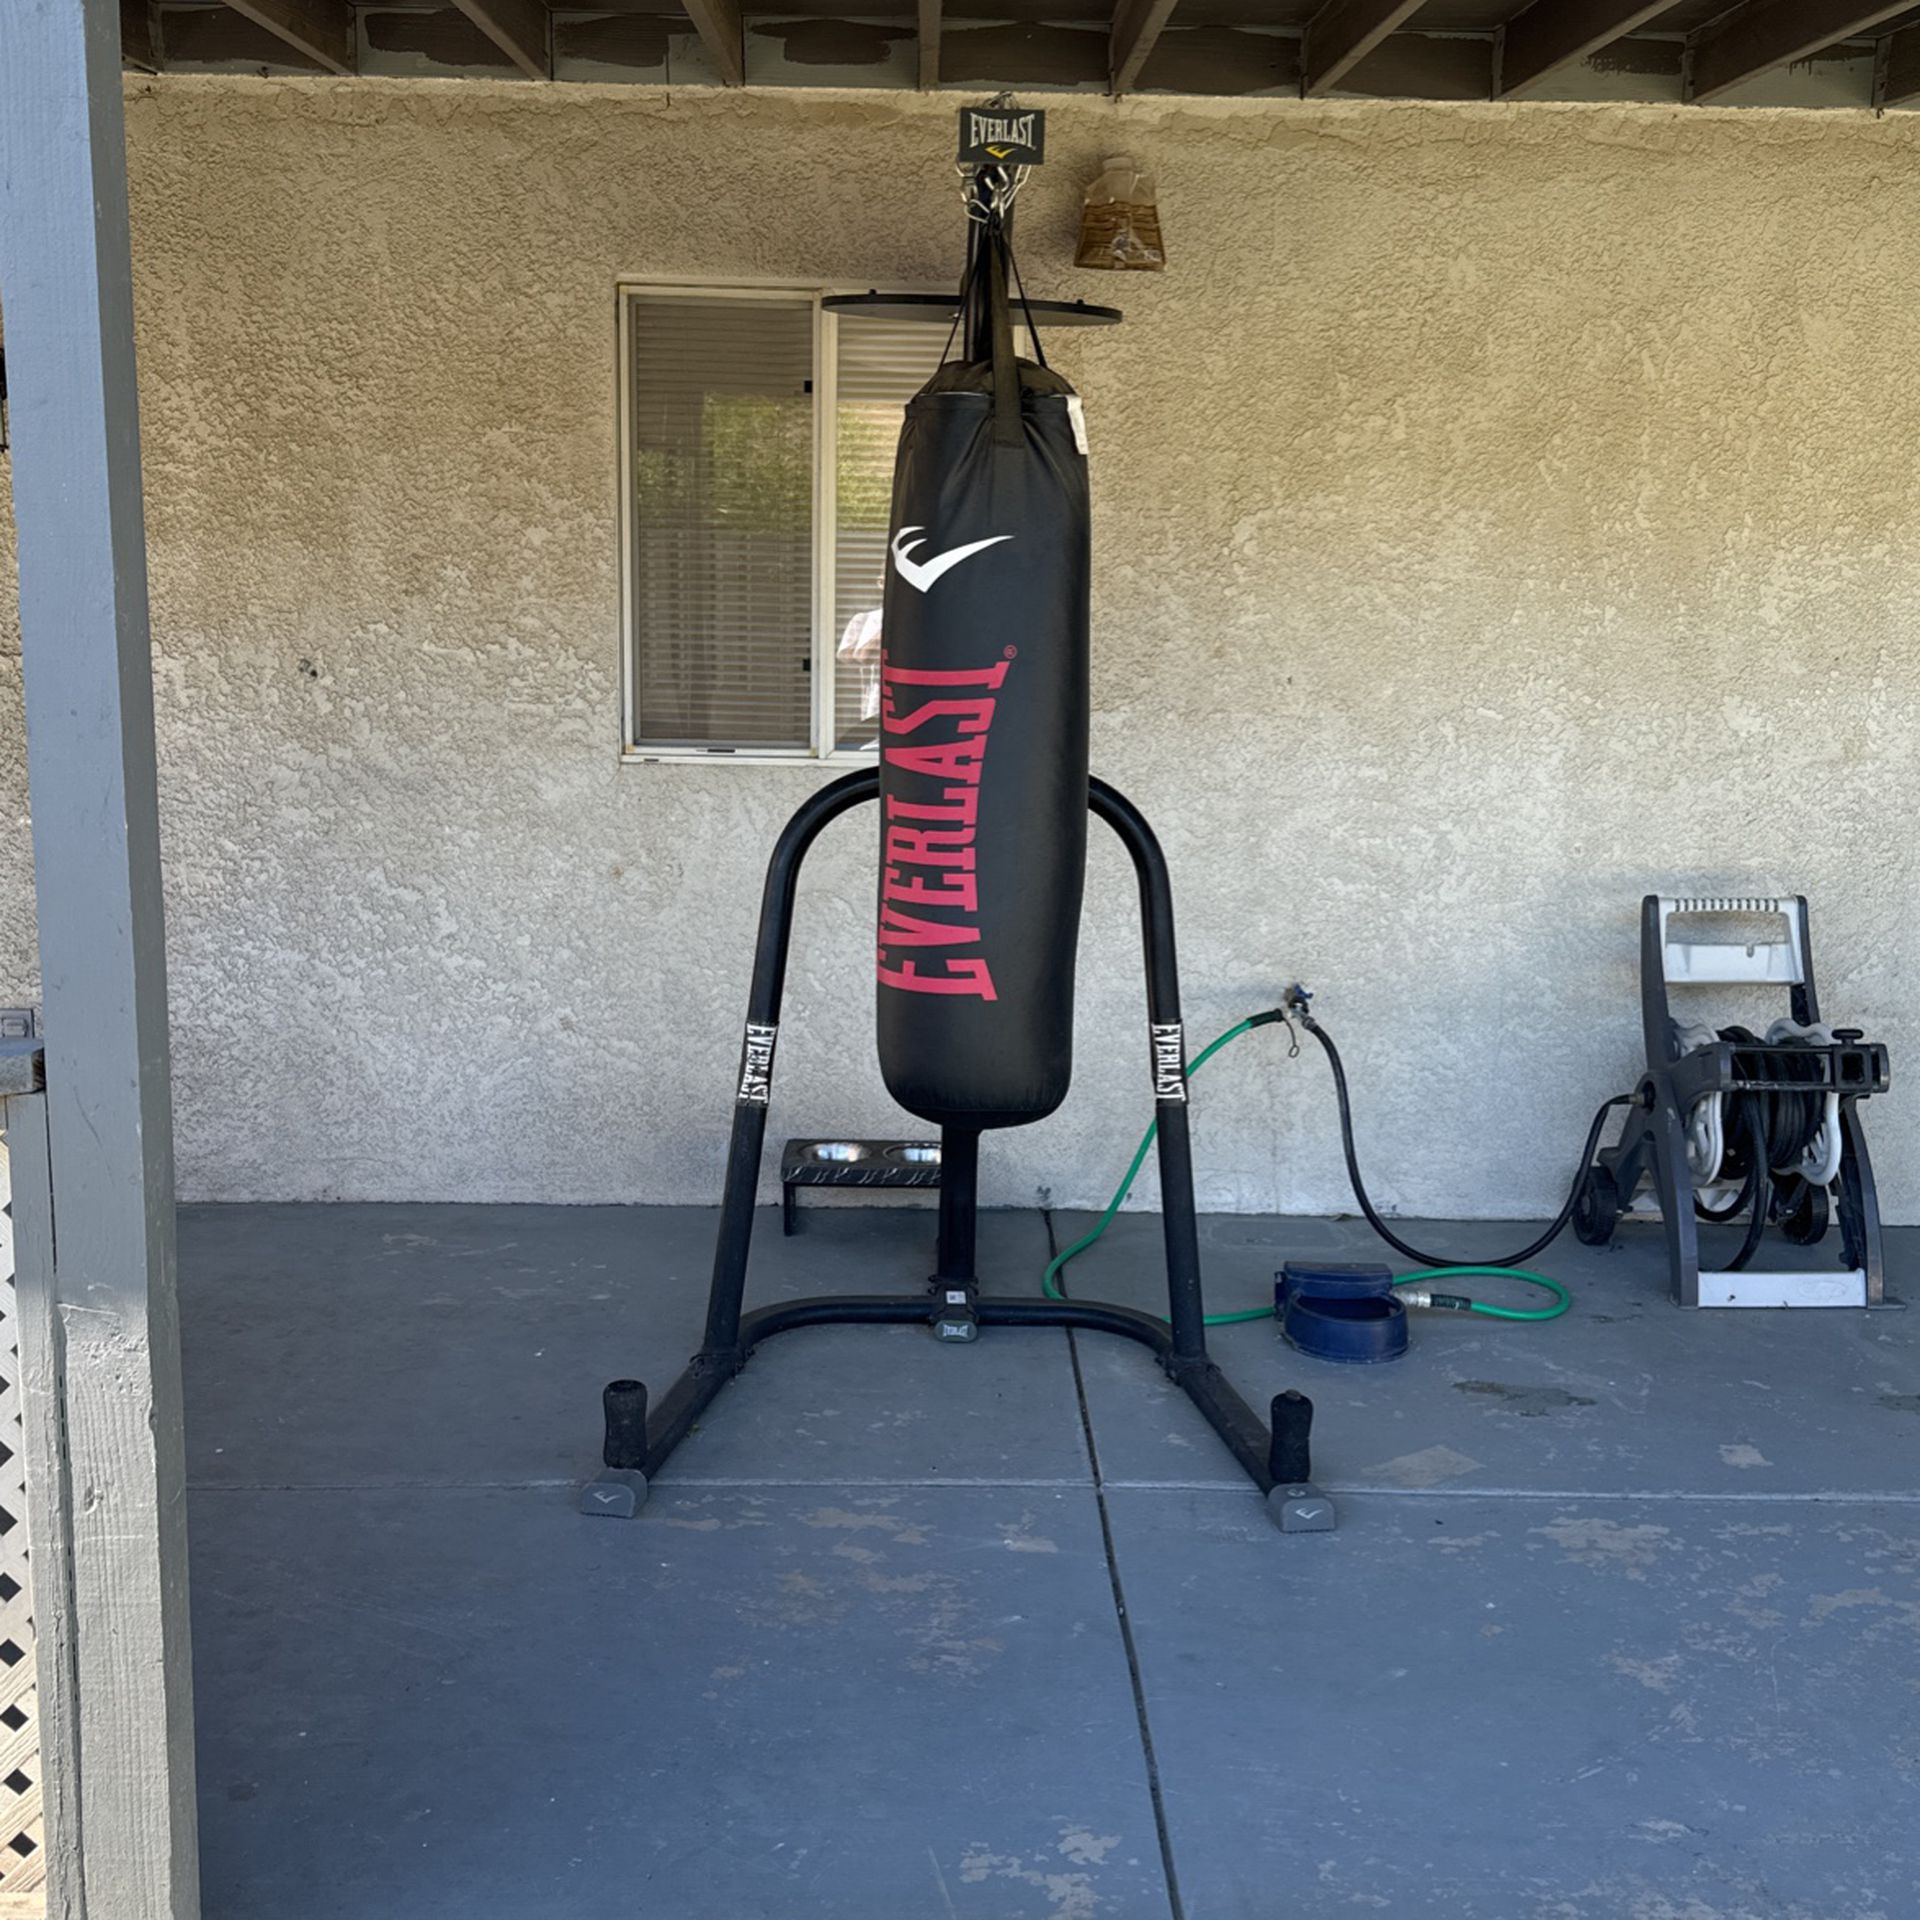 100 Pound Punching Bag With Speed Bag $200 obo